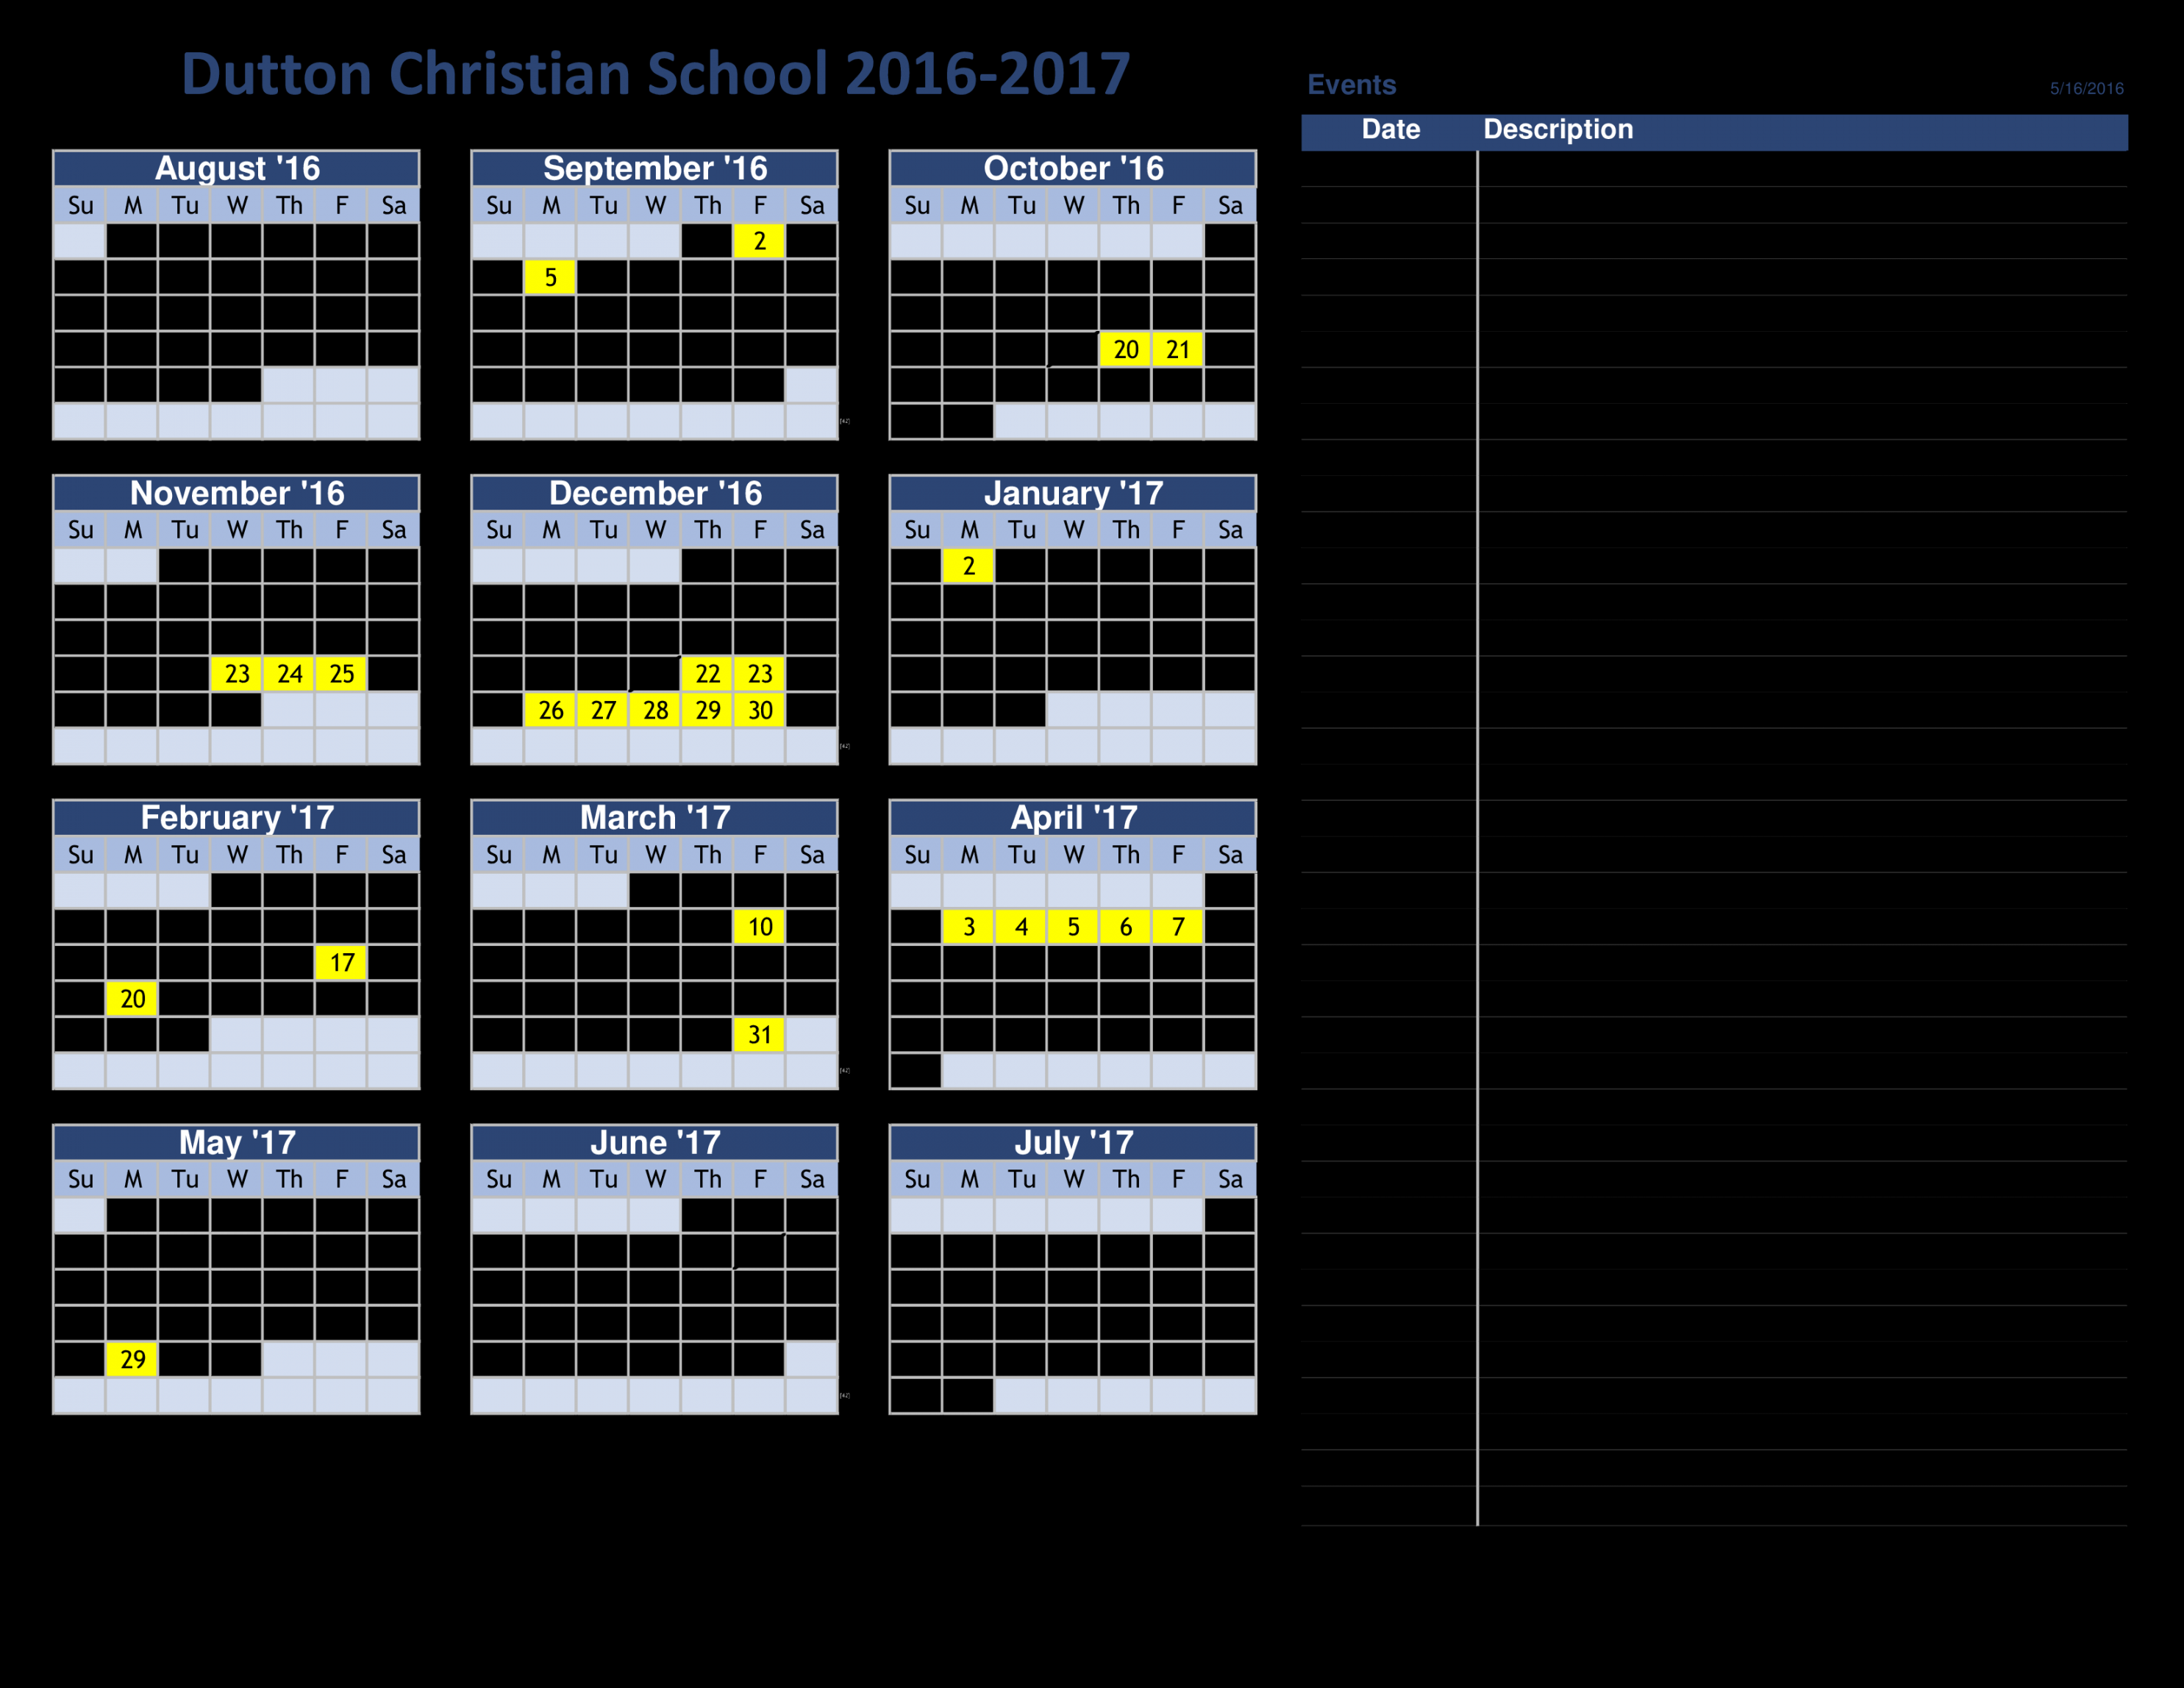 Yearly Event Calendar - How to create a Yearly Event Calendar